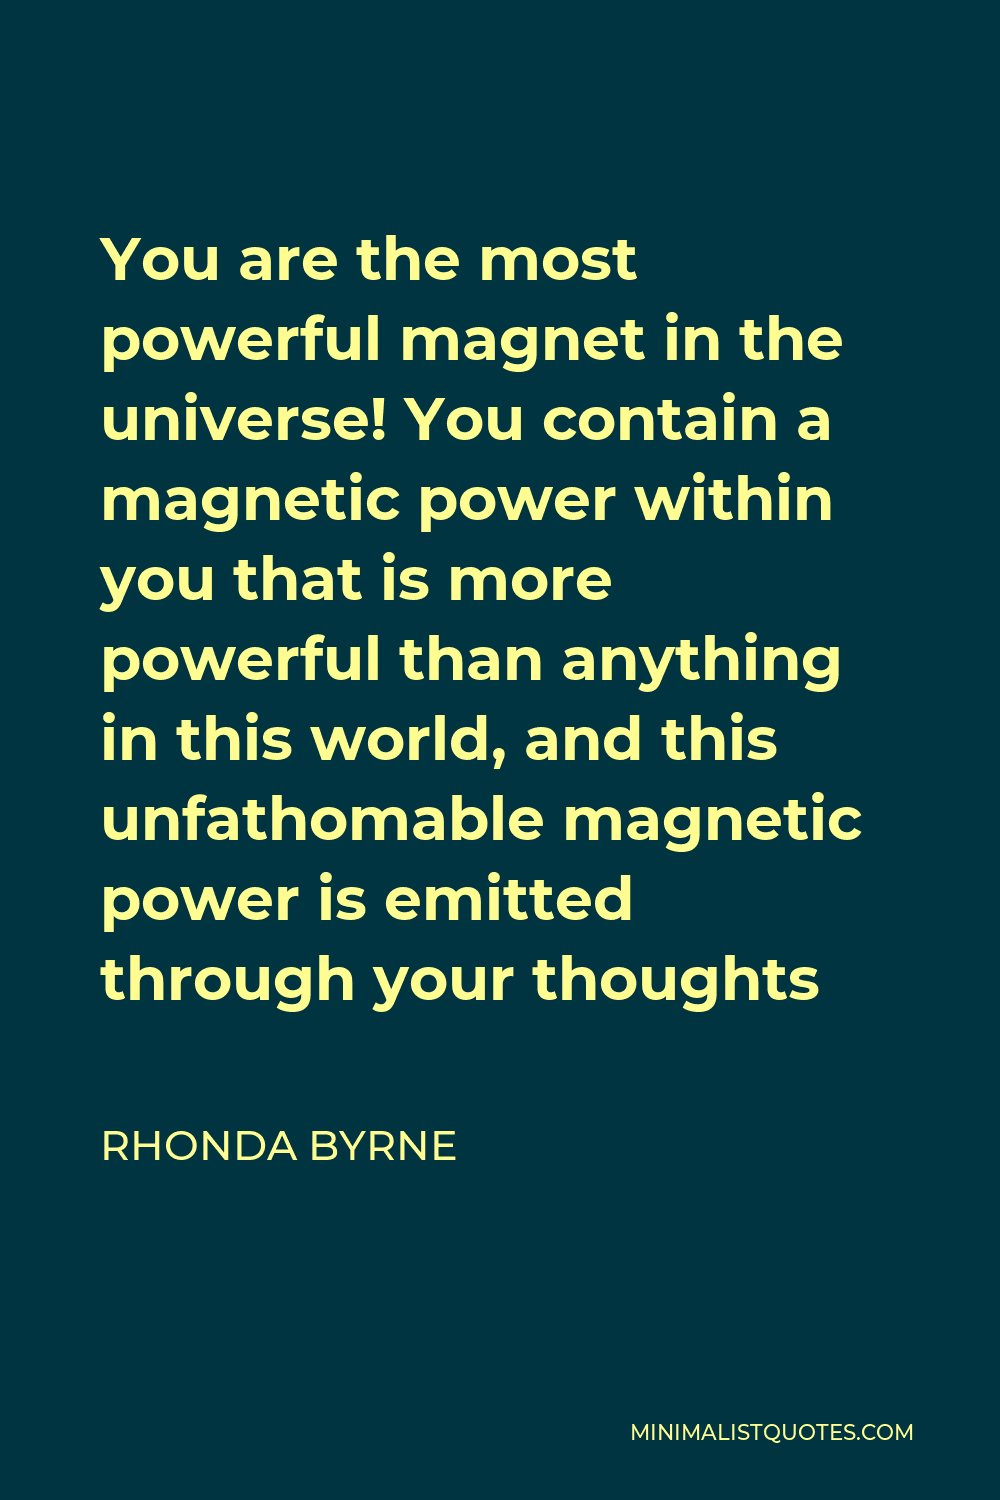 Rhonda Byrne Quote - You are the most powerful magnet in the universe! You contain a magnetic power within you that is more powerful than anything in this world, and this unfathomable magnetic power is emitted through your thoughts